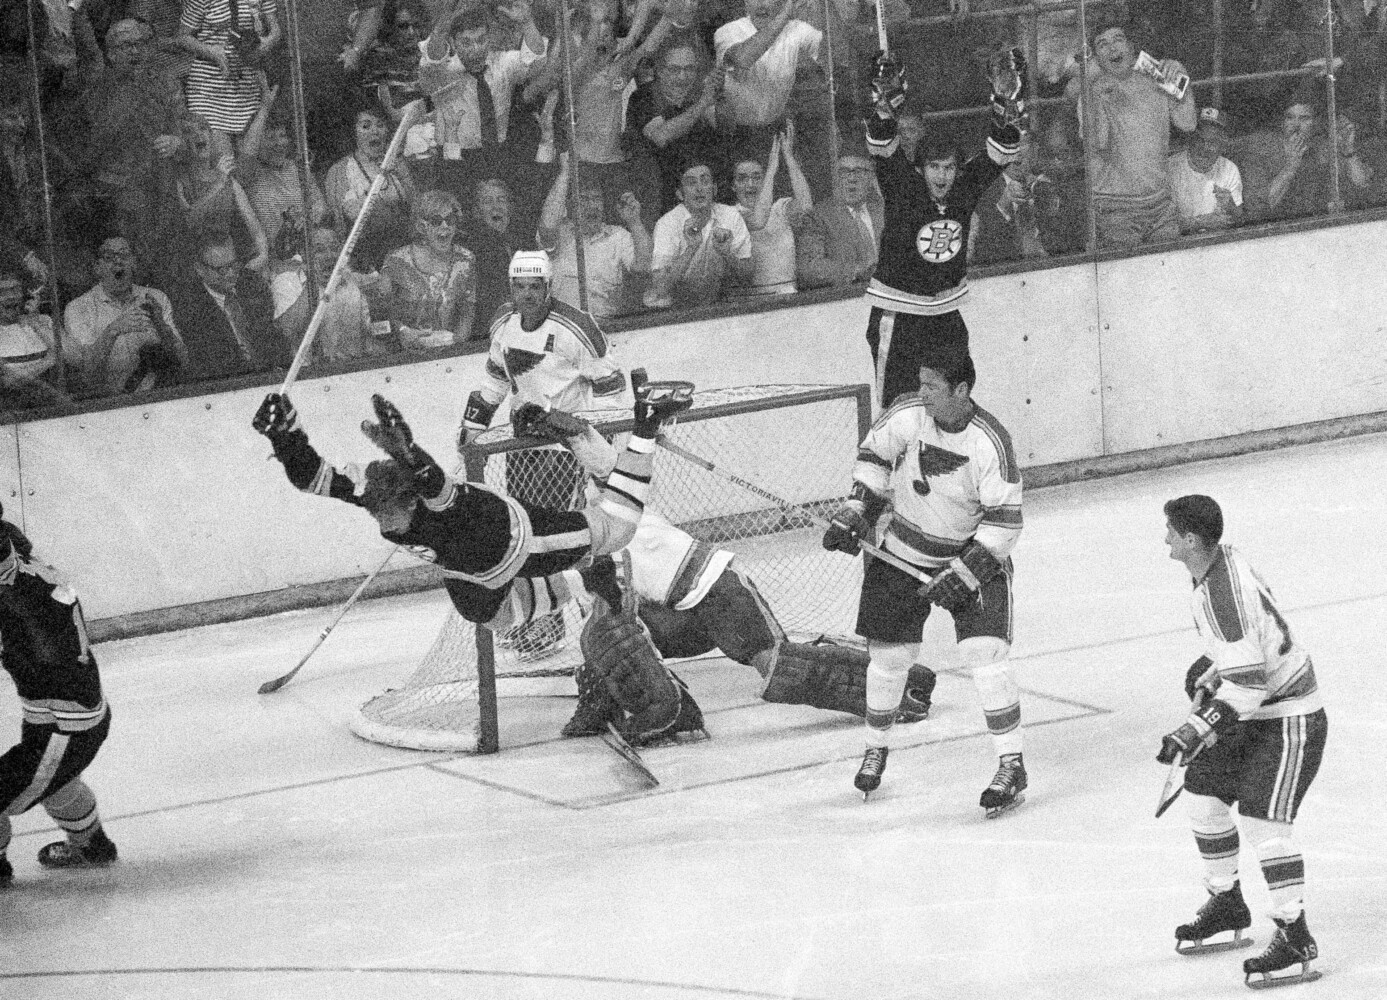 The day Bobby Orr flew into history